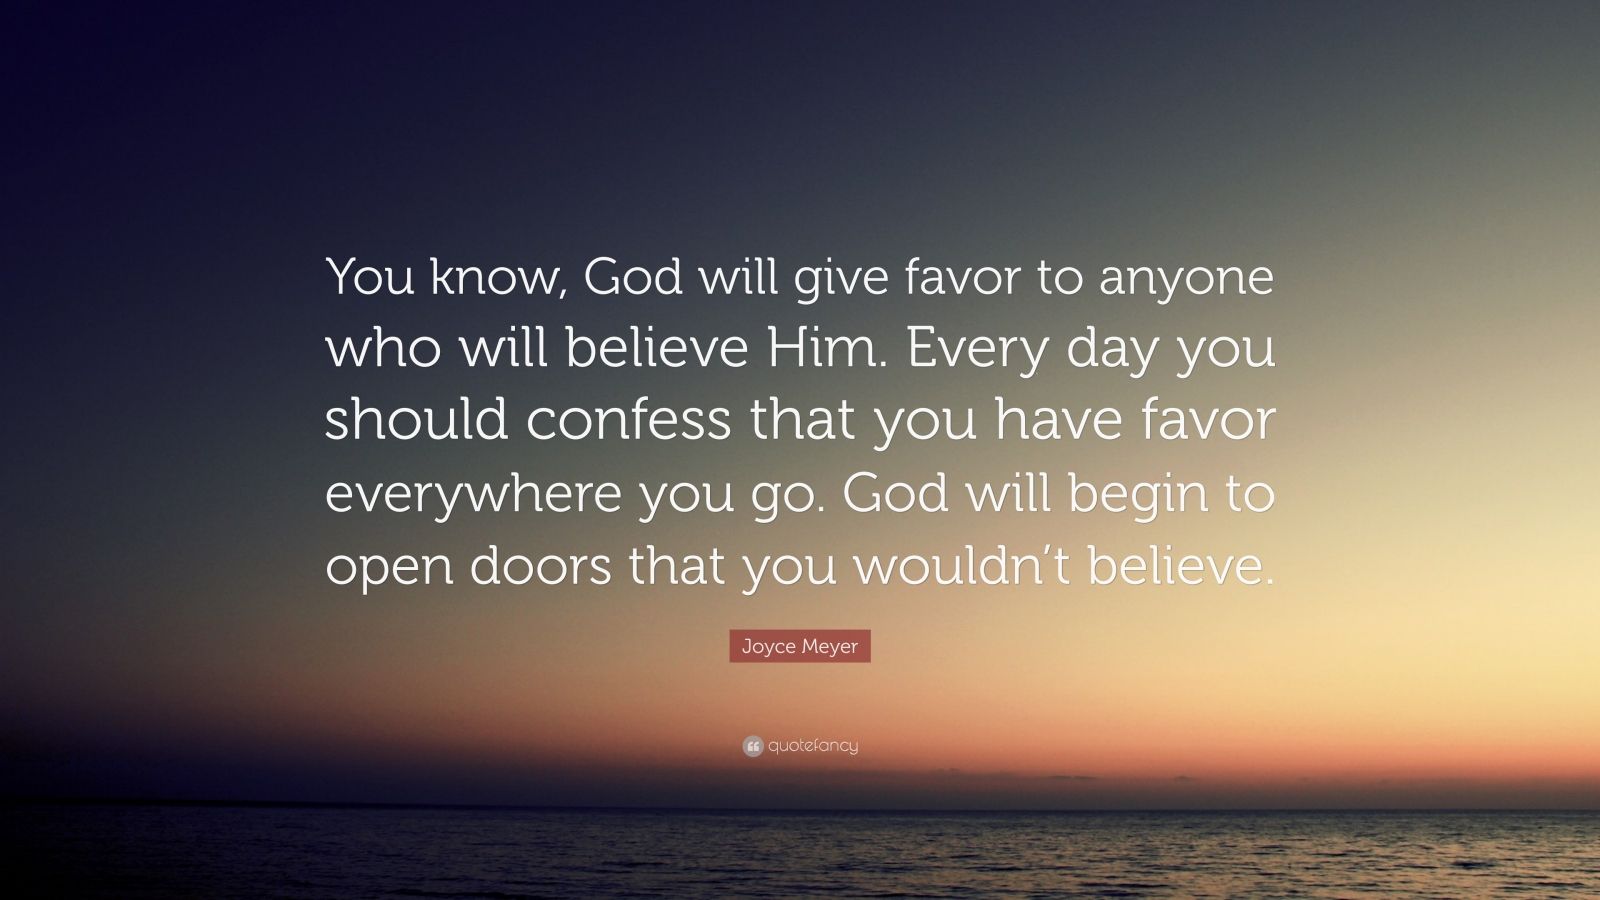 Joyce Meyer Quote: “You know, God will give favor to anyone who will ...